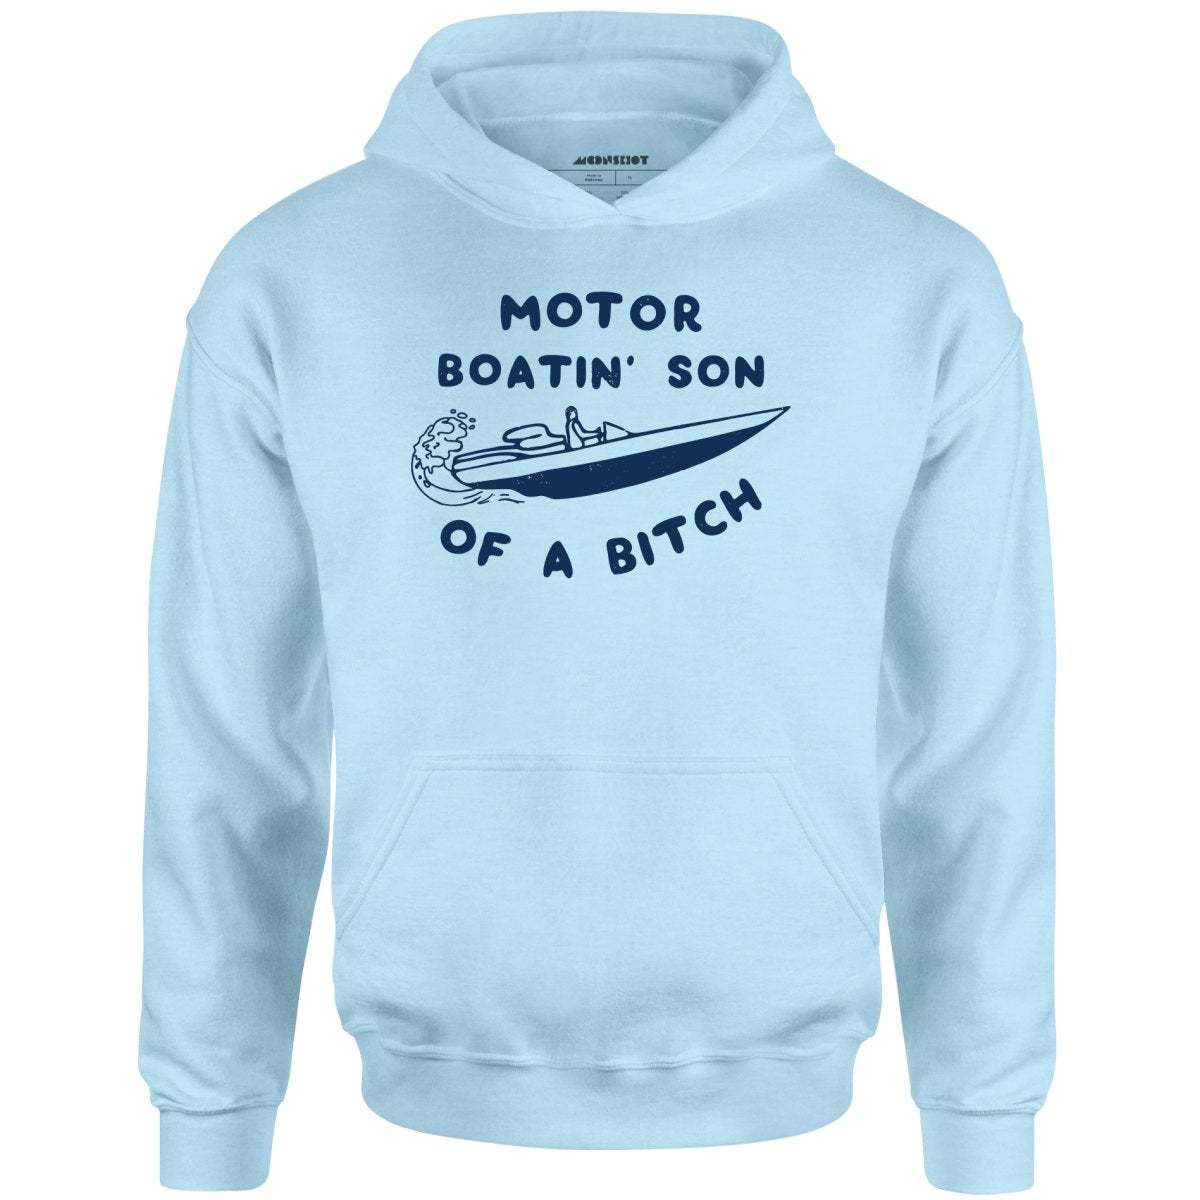 Motor Boatin' Son of a Bitch - Unisex Hoodie